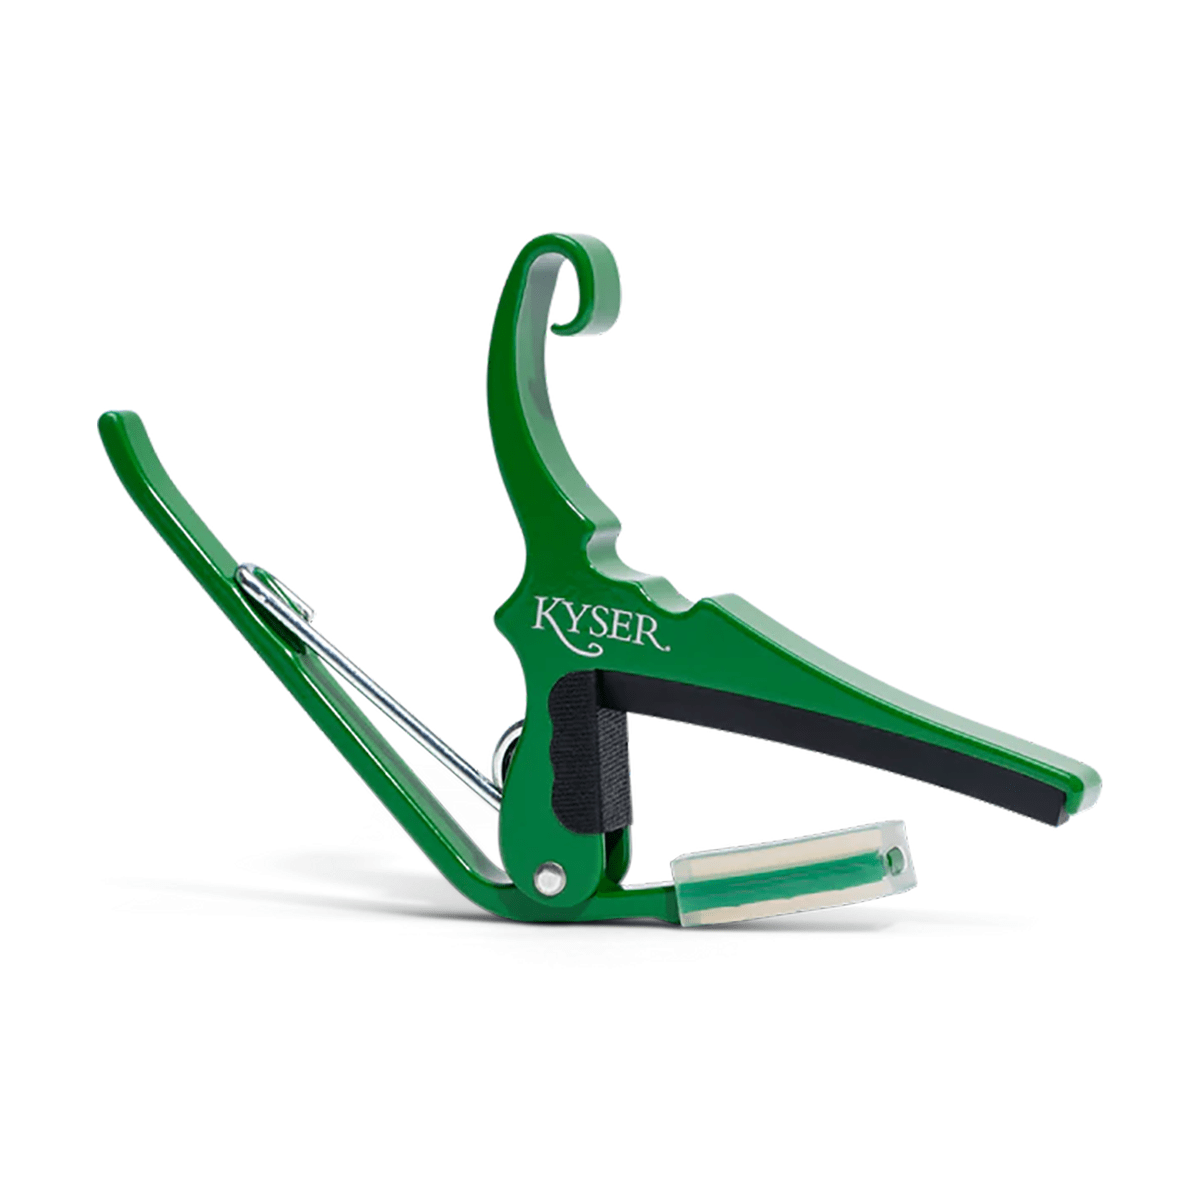 Kyser Home Page Kyser - Green Capo for acoustic guitars. Easy headstock park and one hand reposition. - Byron Music